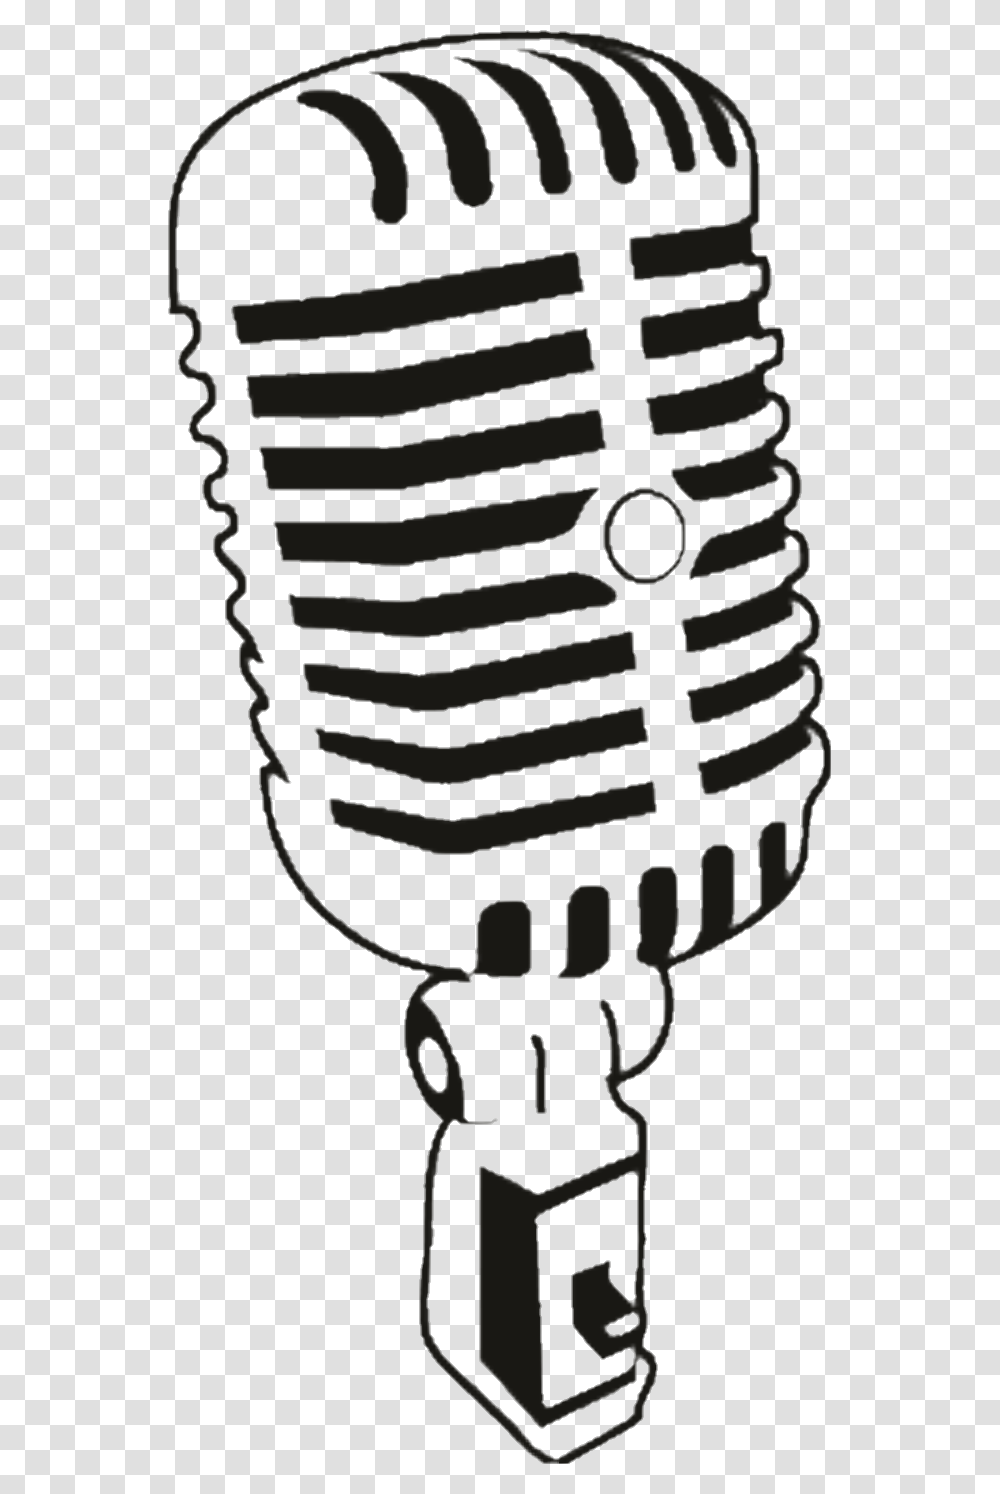 Microphone Rock Microfono Microphone Vector, Armor, Grenade, Bomb, Weapon Transparent Png